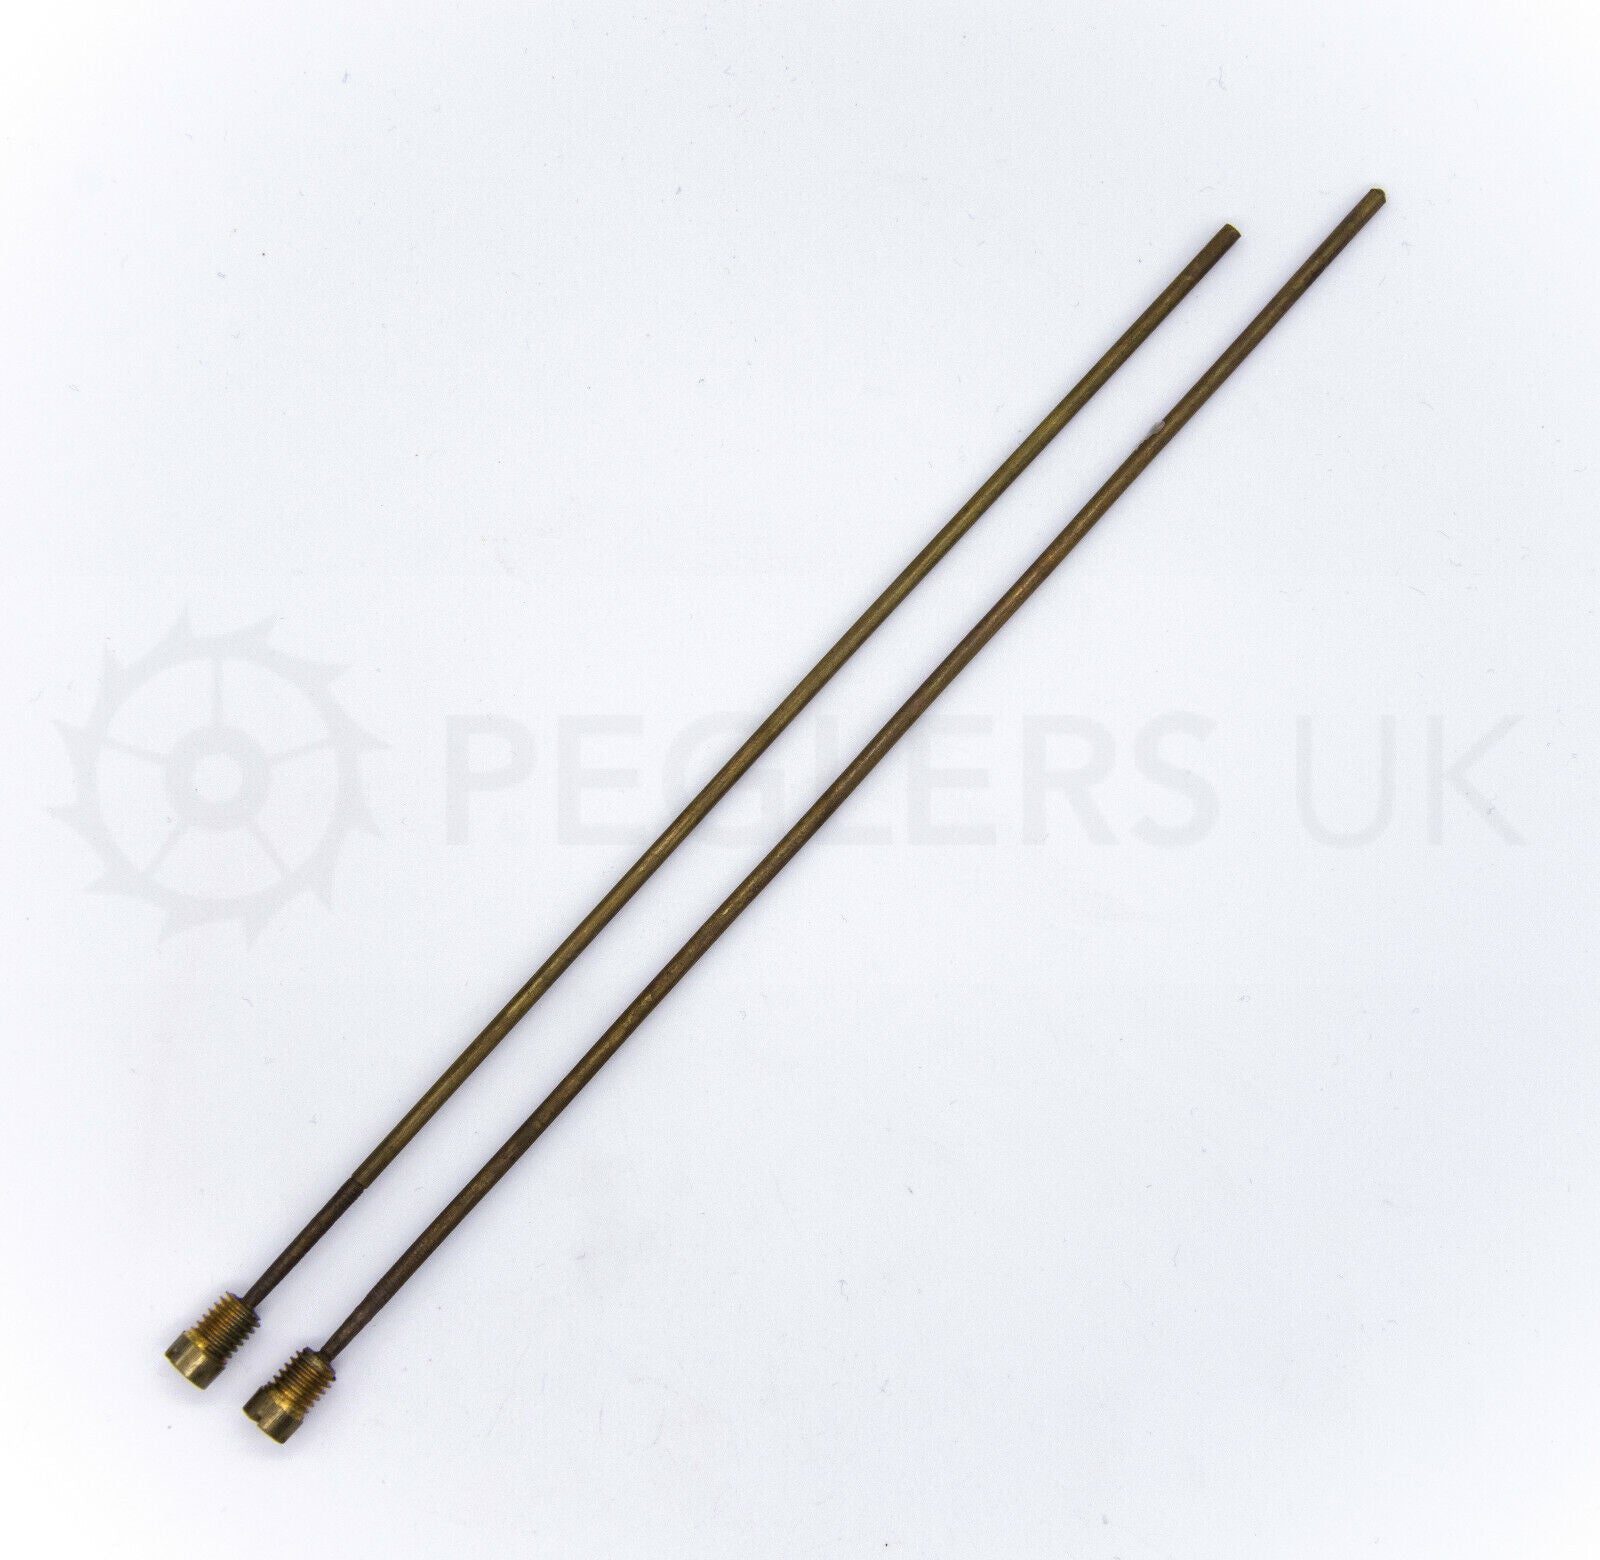 2x Bronze Gong Rods for Clocks 205 & 195mm